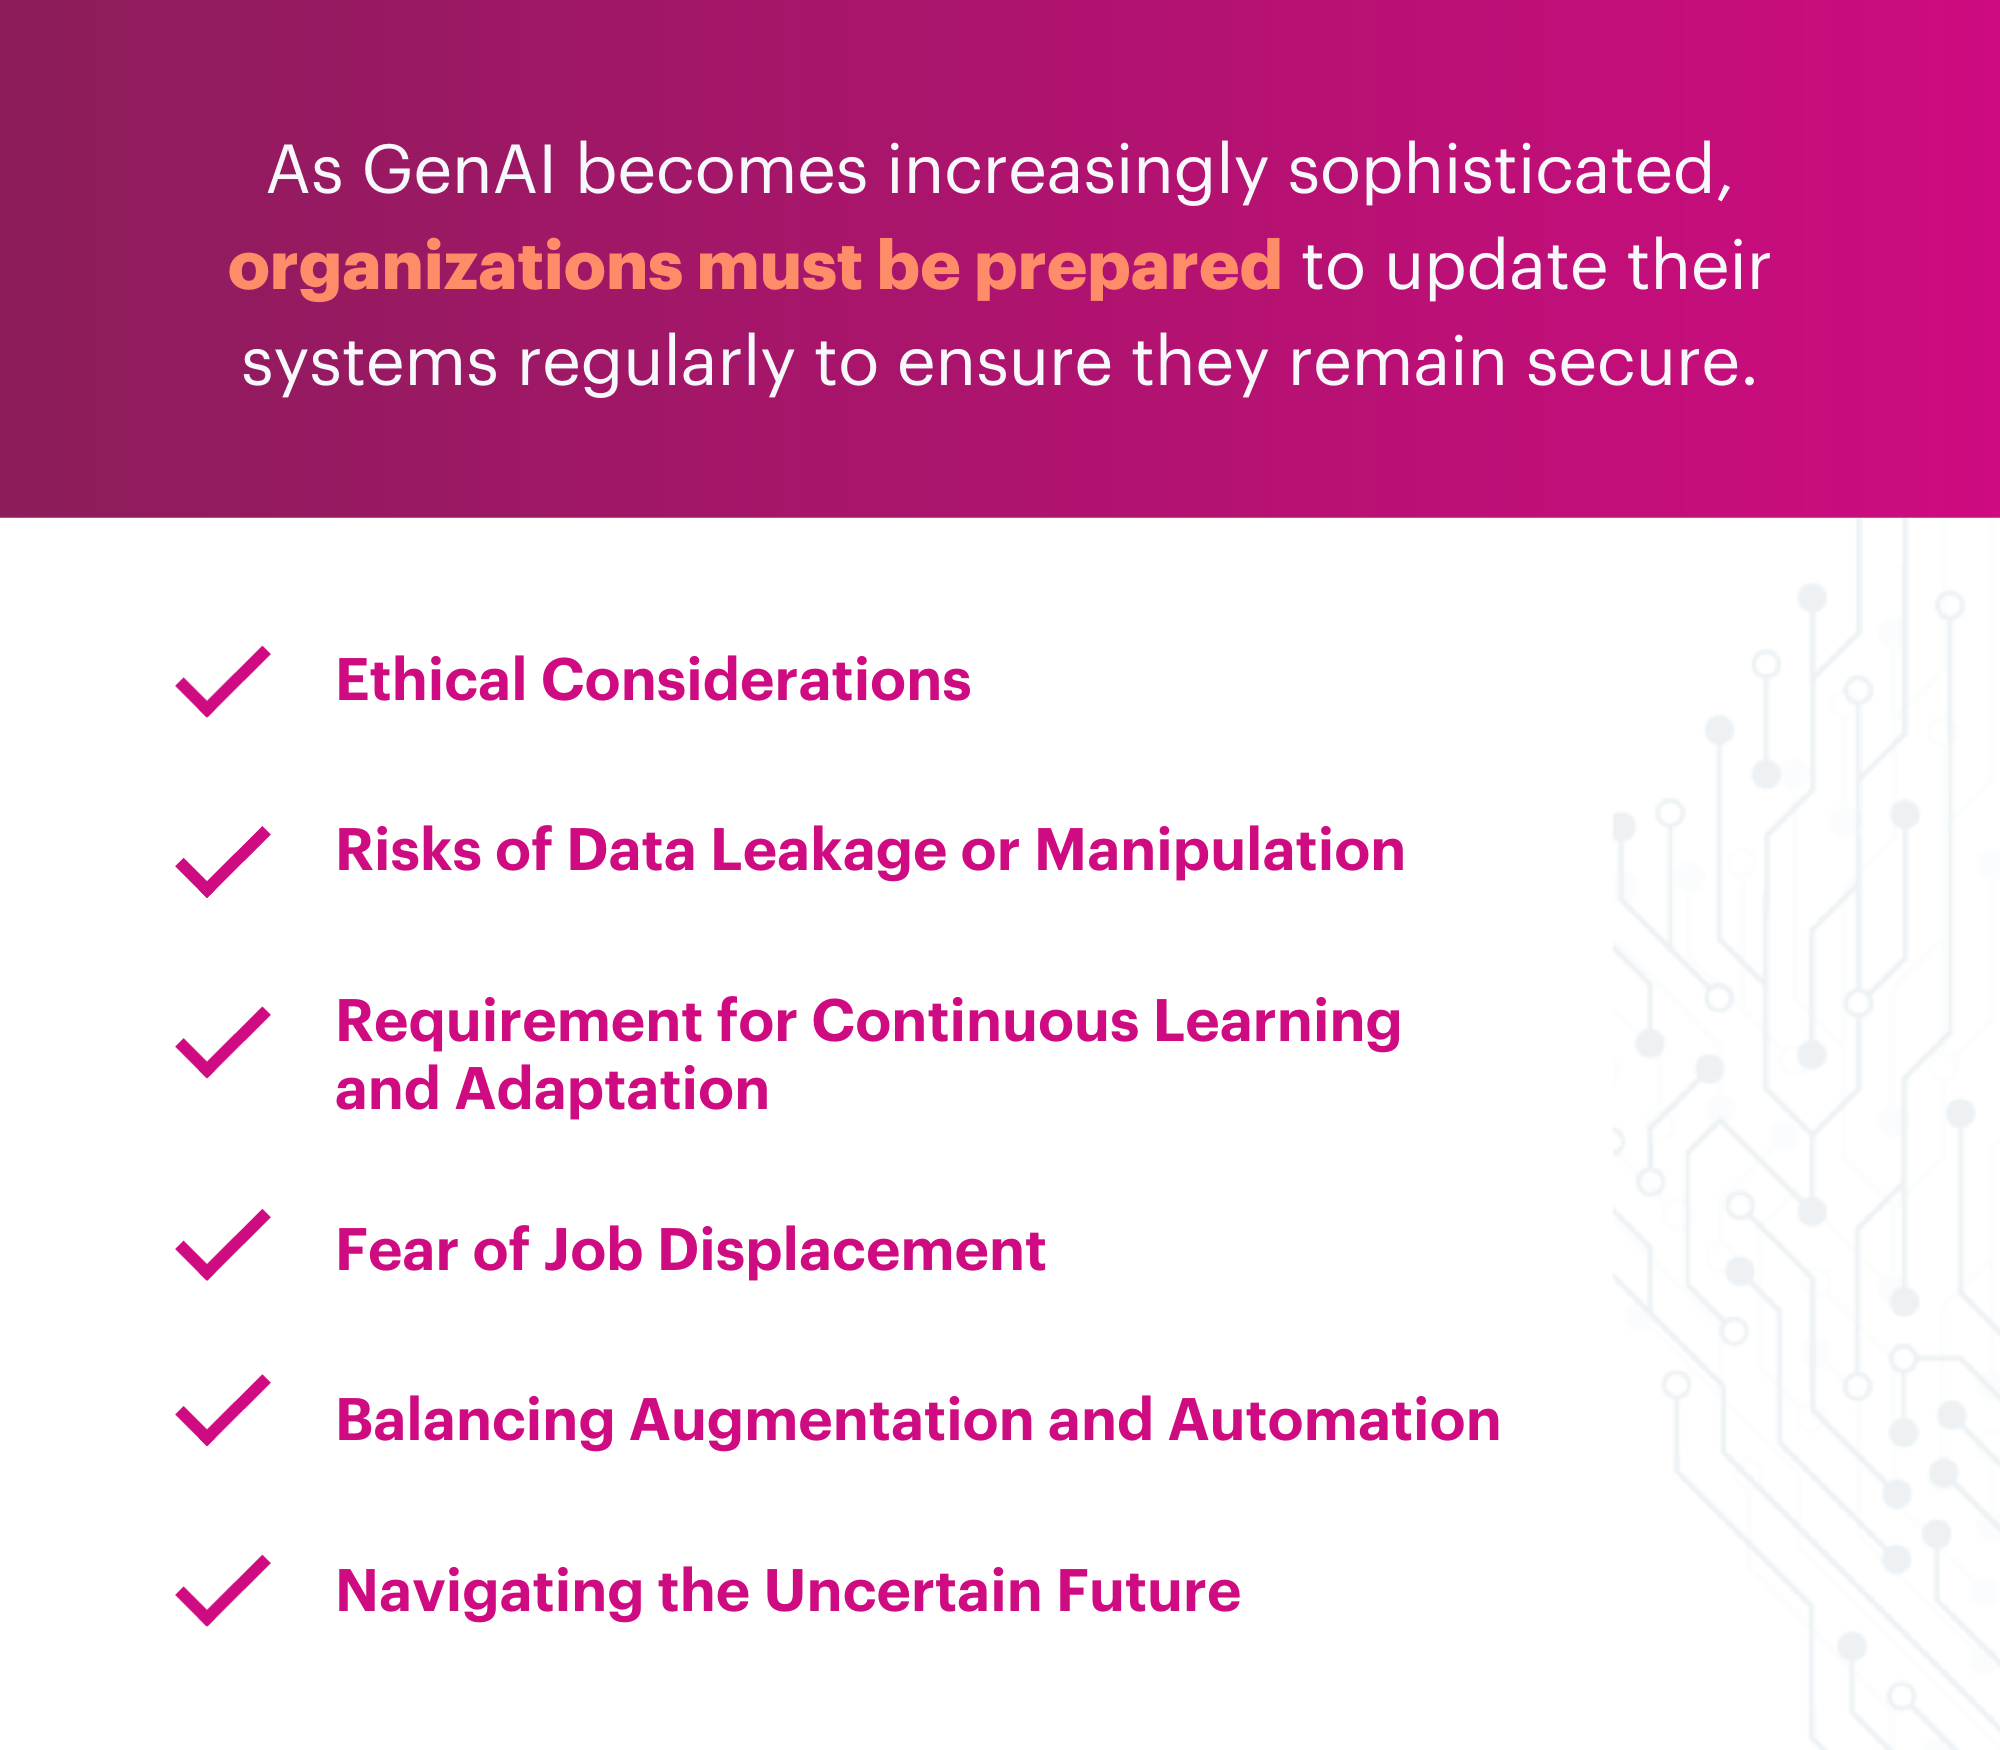 as GenAI becomes increasingly sophisticated, organizations must be prepared to update their systems regularly to ensure they remain secure. Ethical Considerations: With limited regulation surrounding AI technologies, businesses are responsible for ensuring the ethical use of GenAI. Misuse of technology for unethical purposes can harm both individuals and industries. Risks of Data Leakage or Manipulation: GenAI may risk data leakage or manipulation if it malfunctions or is misused. These risks require companies to have measures to protect data and ensure its integrity. Requirement for Continuous Learning and Adaptation: Implementing GenAI may require employees to learn new skills and adapt to new working methods. This might involve reskilling initiatives and training programs for employees. Fear of Job Displacement: The potential for job displacement due to automation is a significant challenge. Companies need to manage this fear among employees and work towards ensuring that GenAI is used to augment jobs rather than replace them. Balancing Augmentation and Automation: Striking the right balance between AI augmentation and automation is crucial. It's not always clear which processes should be automated or aided by AI. Navigating the Uncertain Future: The future impact of GenAI on the workforce remains uncertain. This uncertainty challenges organizations as they strategize for the future and effectively implement GenAI.